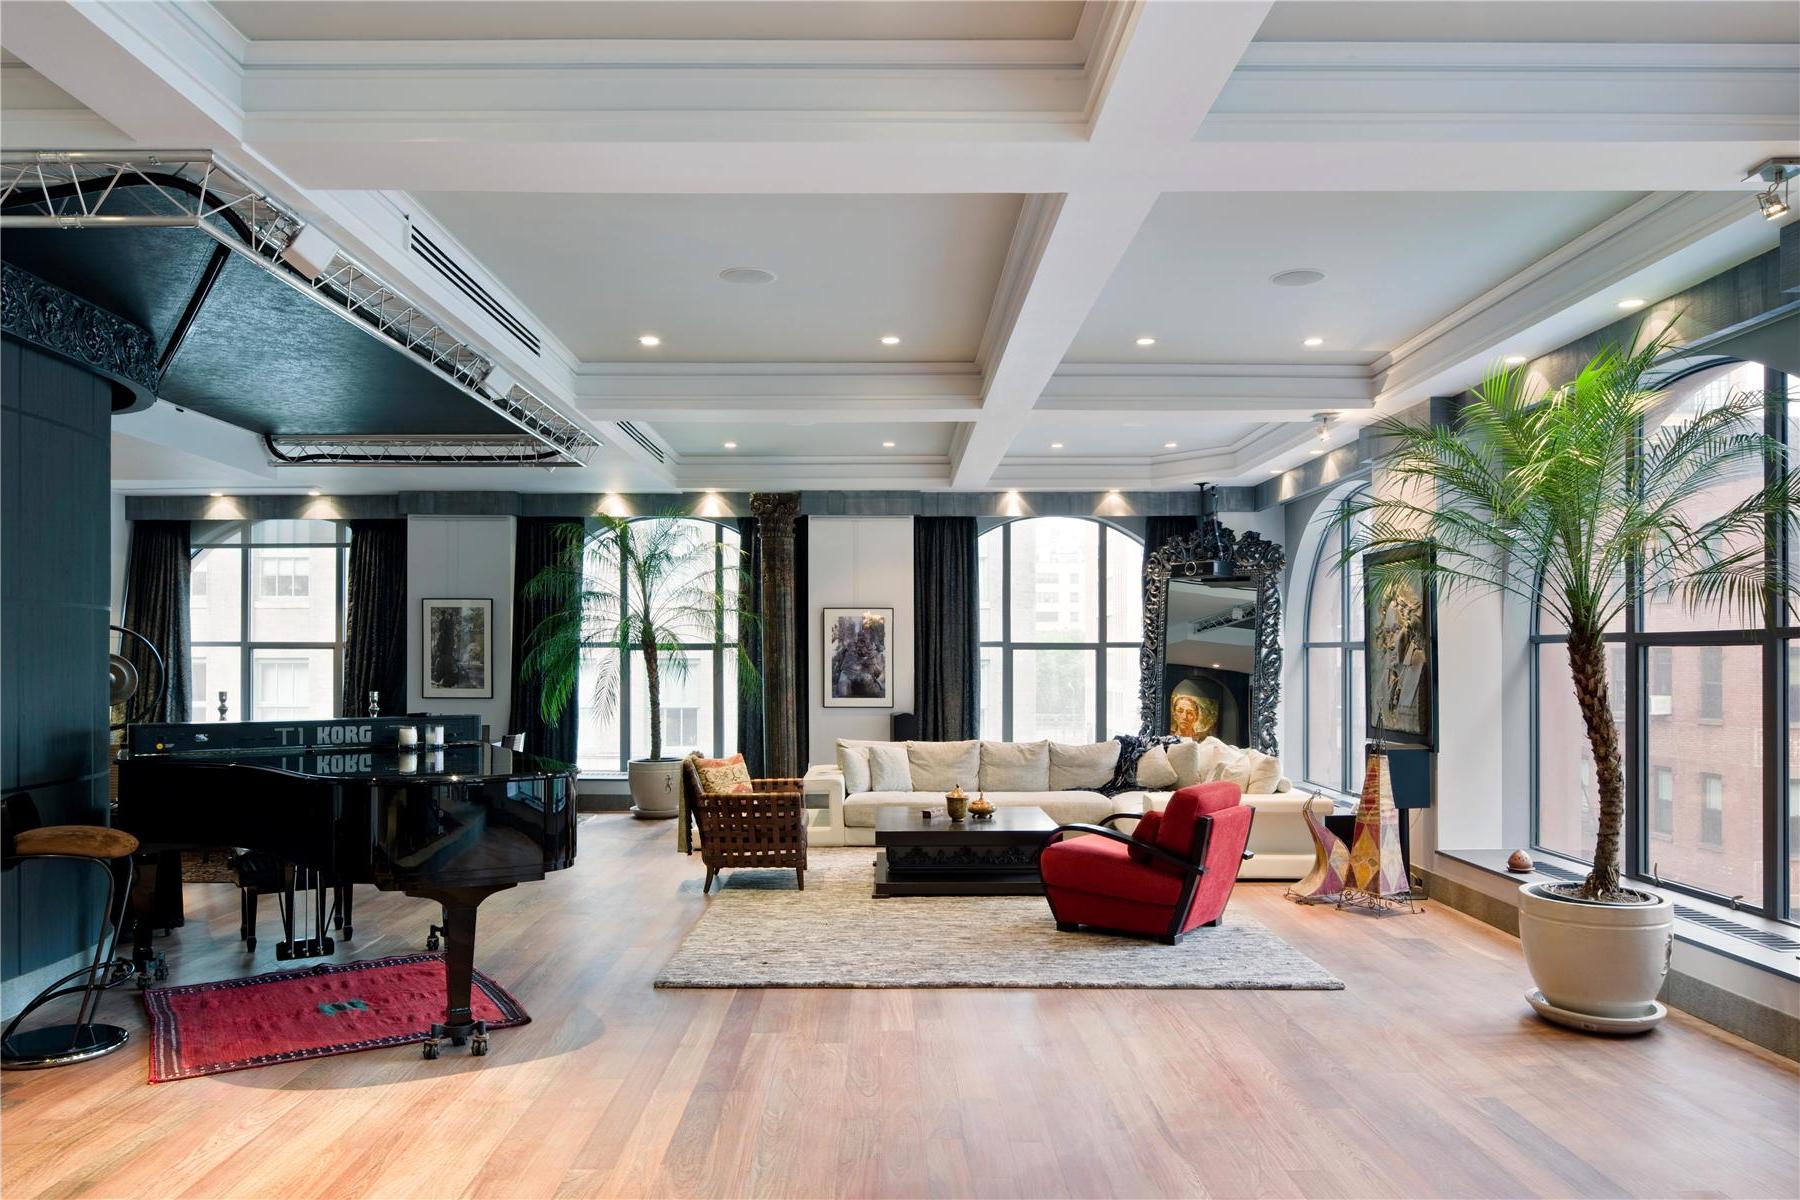 Two Luxurious Lofts  on Sale in Tribeca New York 